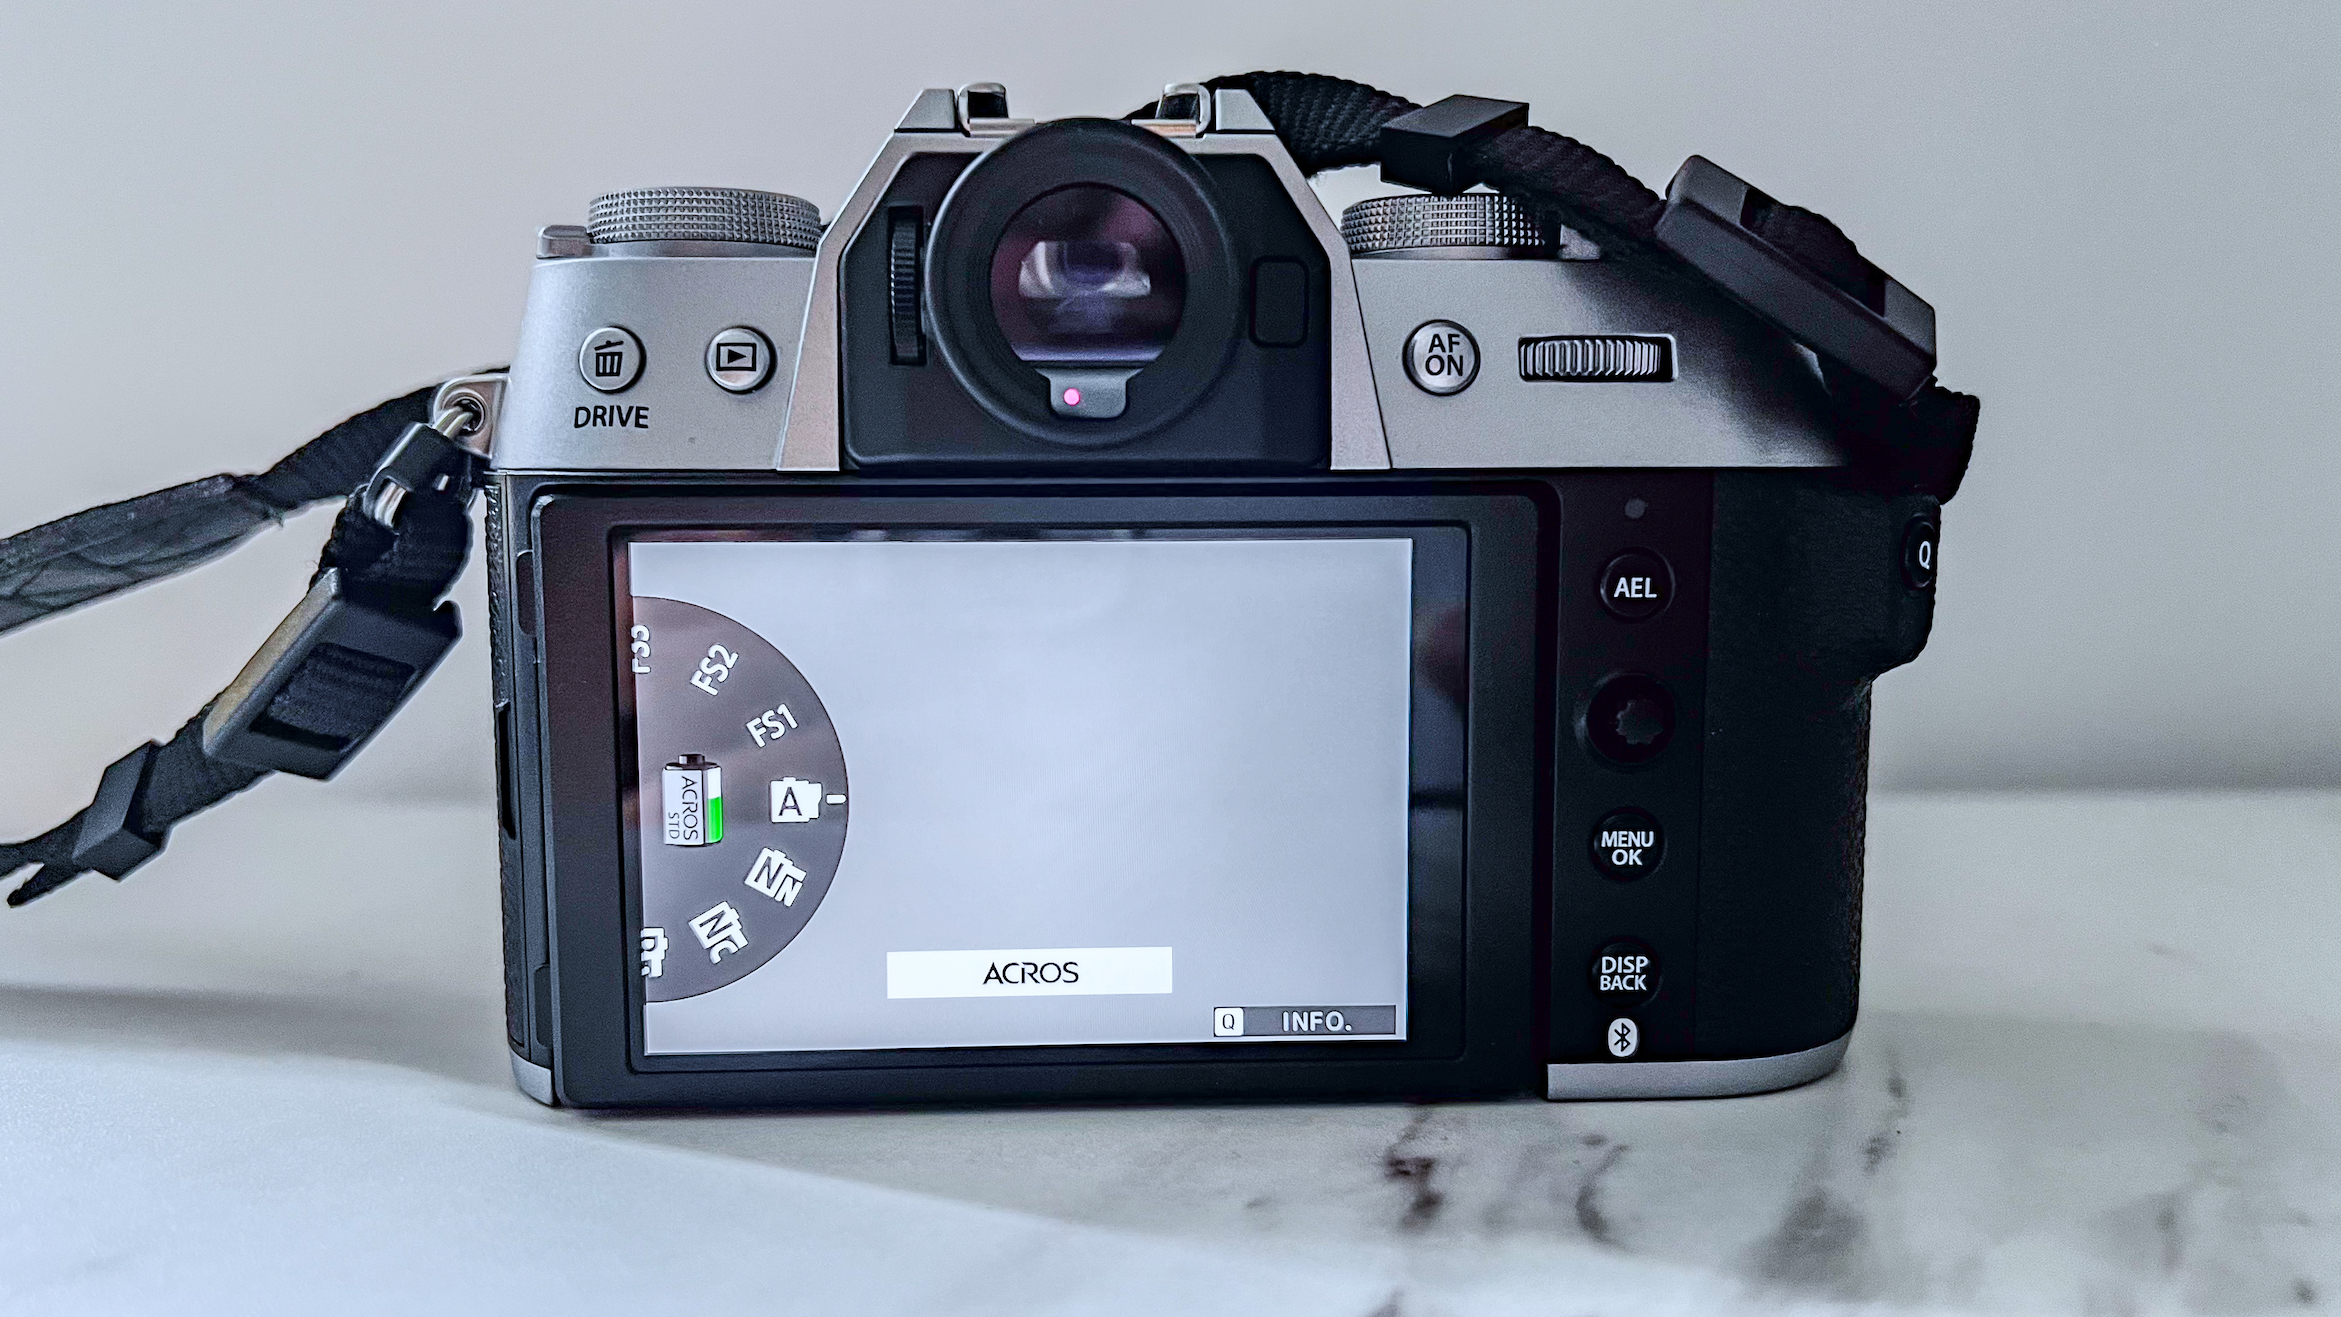 A selected Film Simulation displayed on the rear LCD of the Fujifilm X-T50